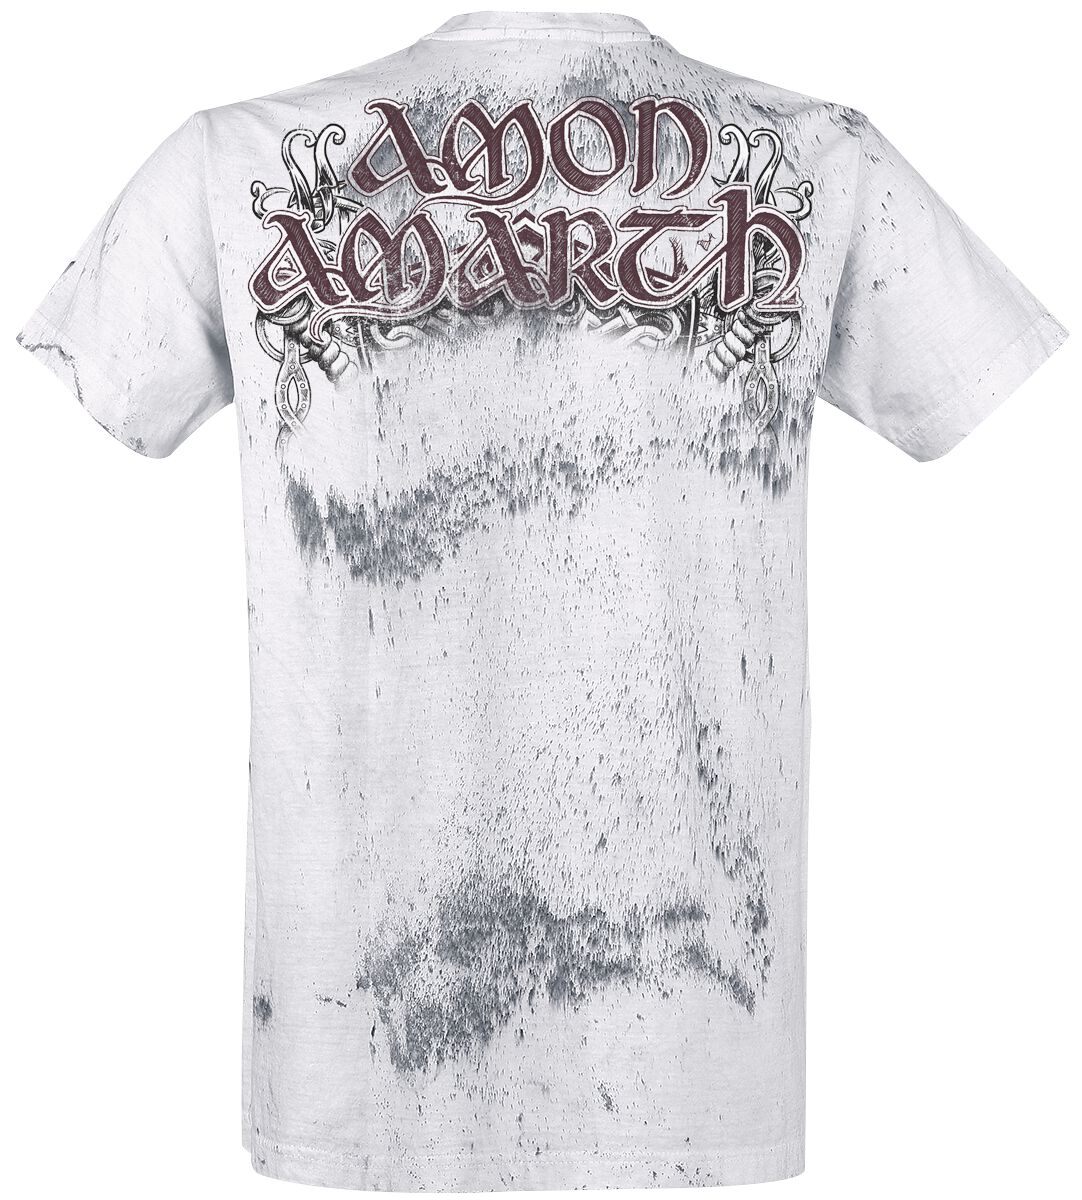 Beardskulls Amon Amarth T Shirt Emp In case you have questions about your order. emp